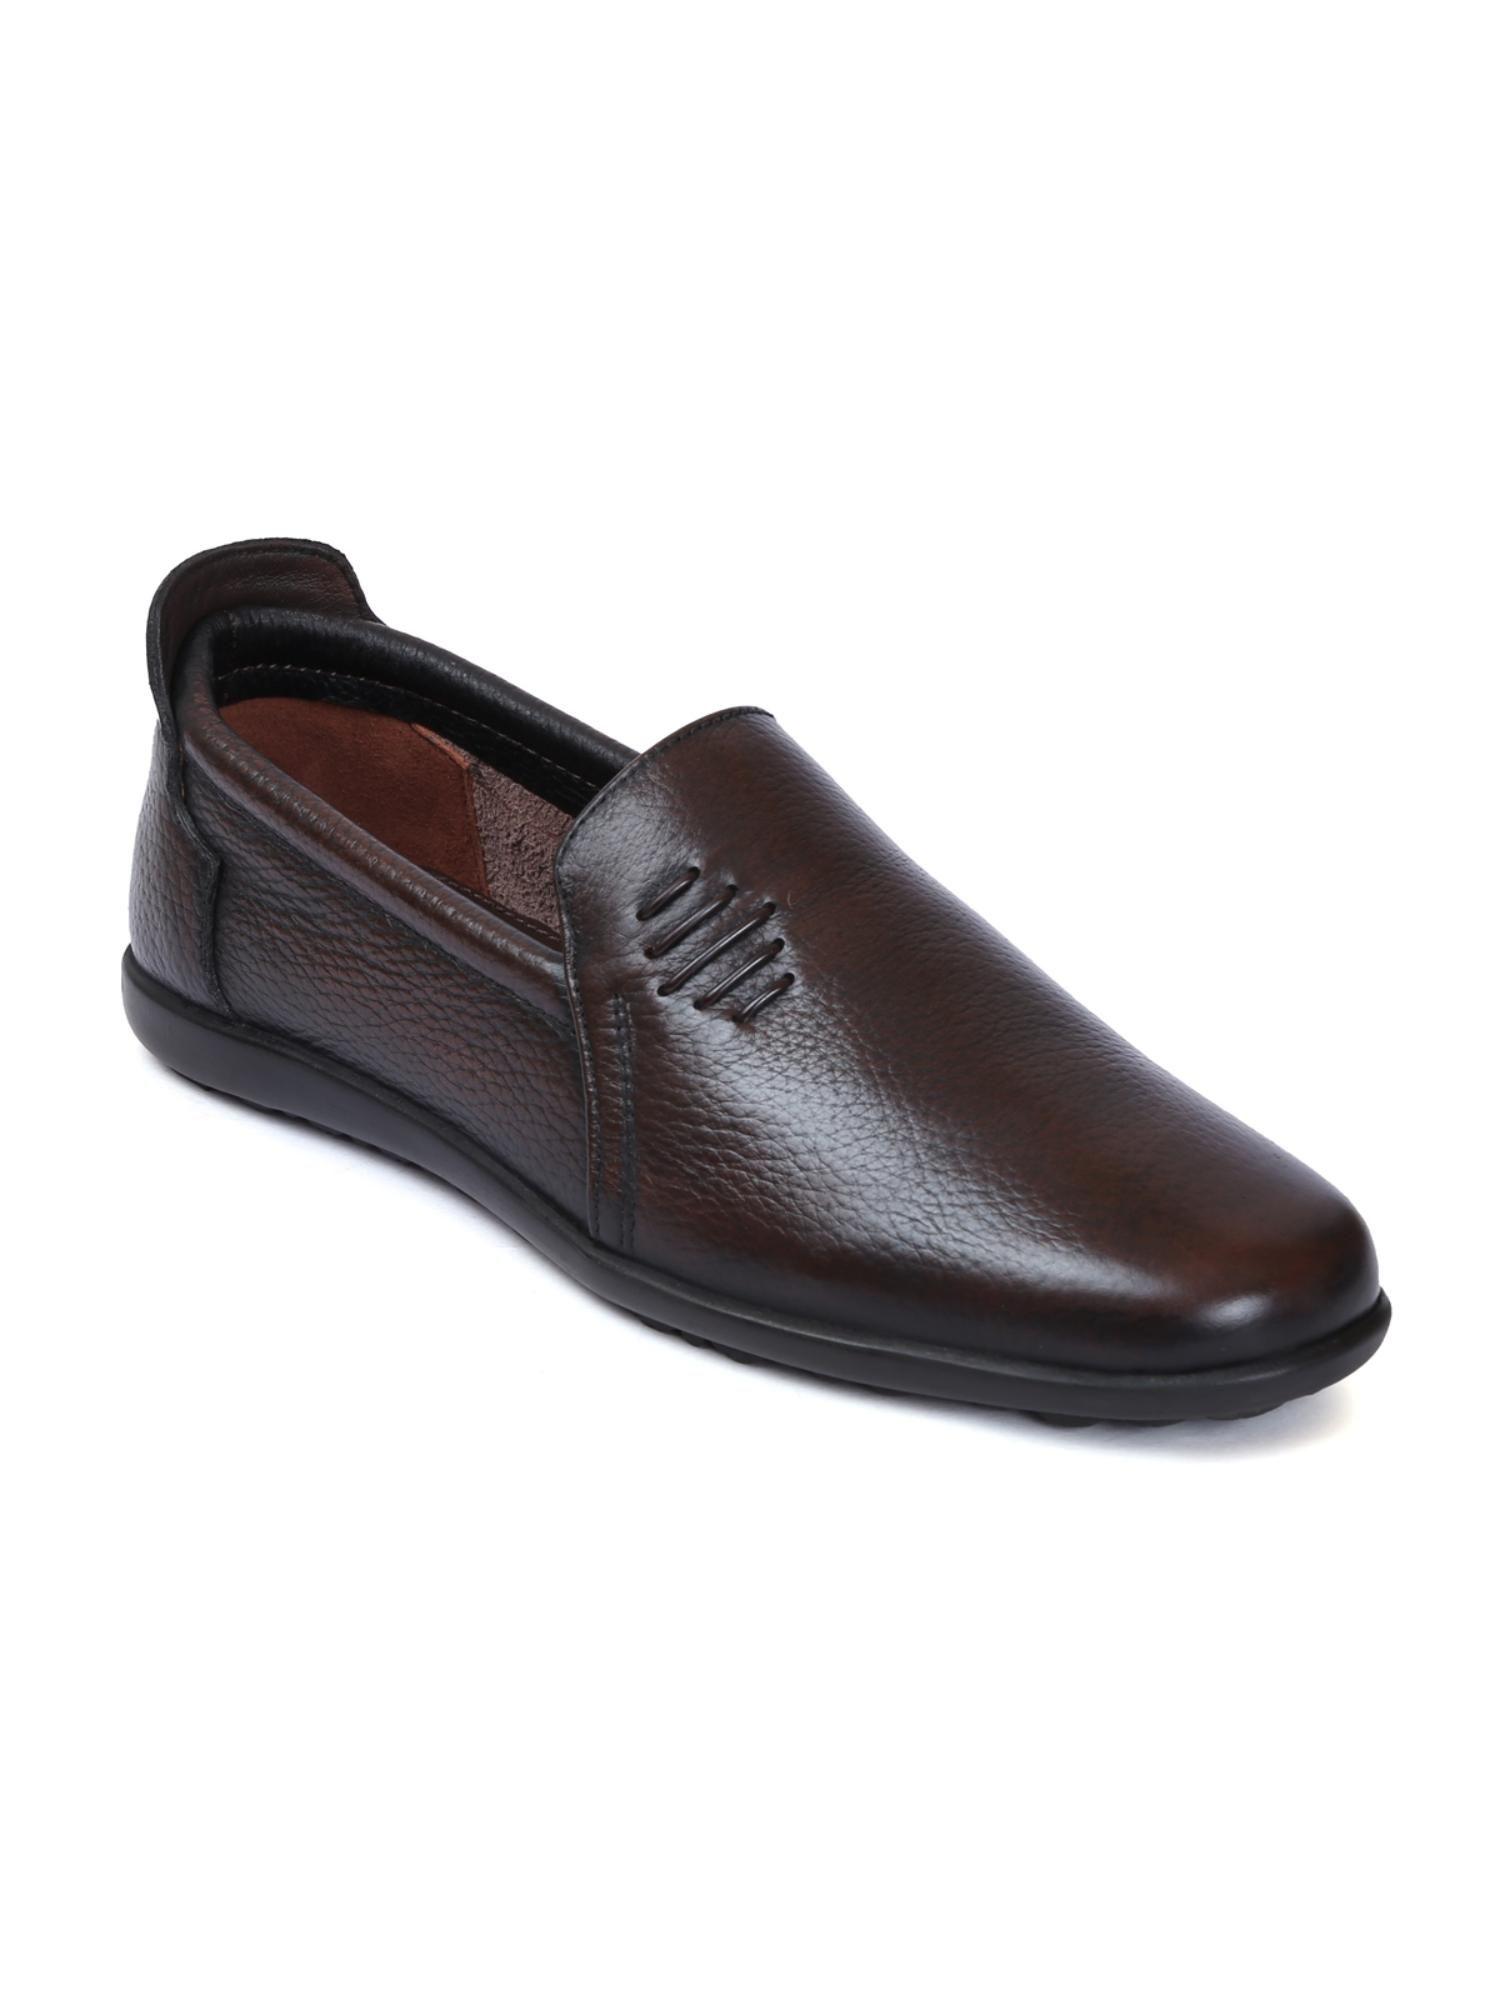 mens slip on loafers and moccasins - brown